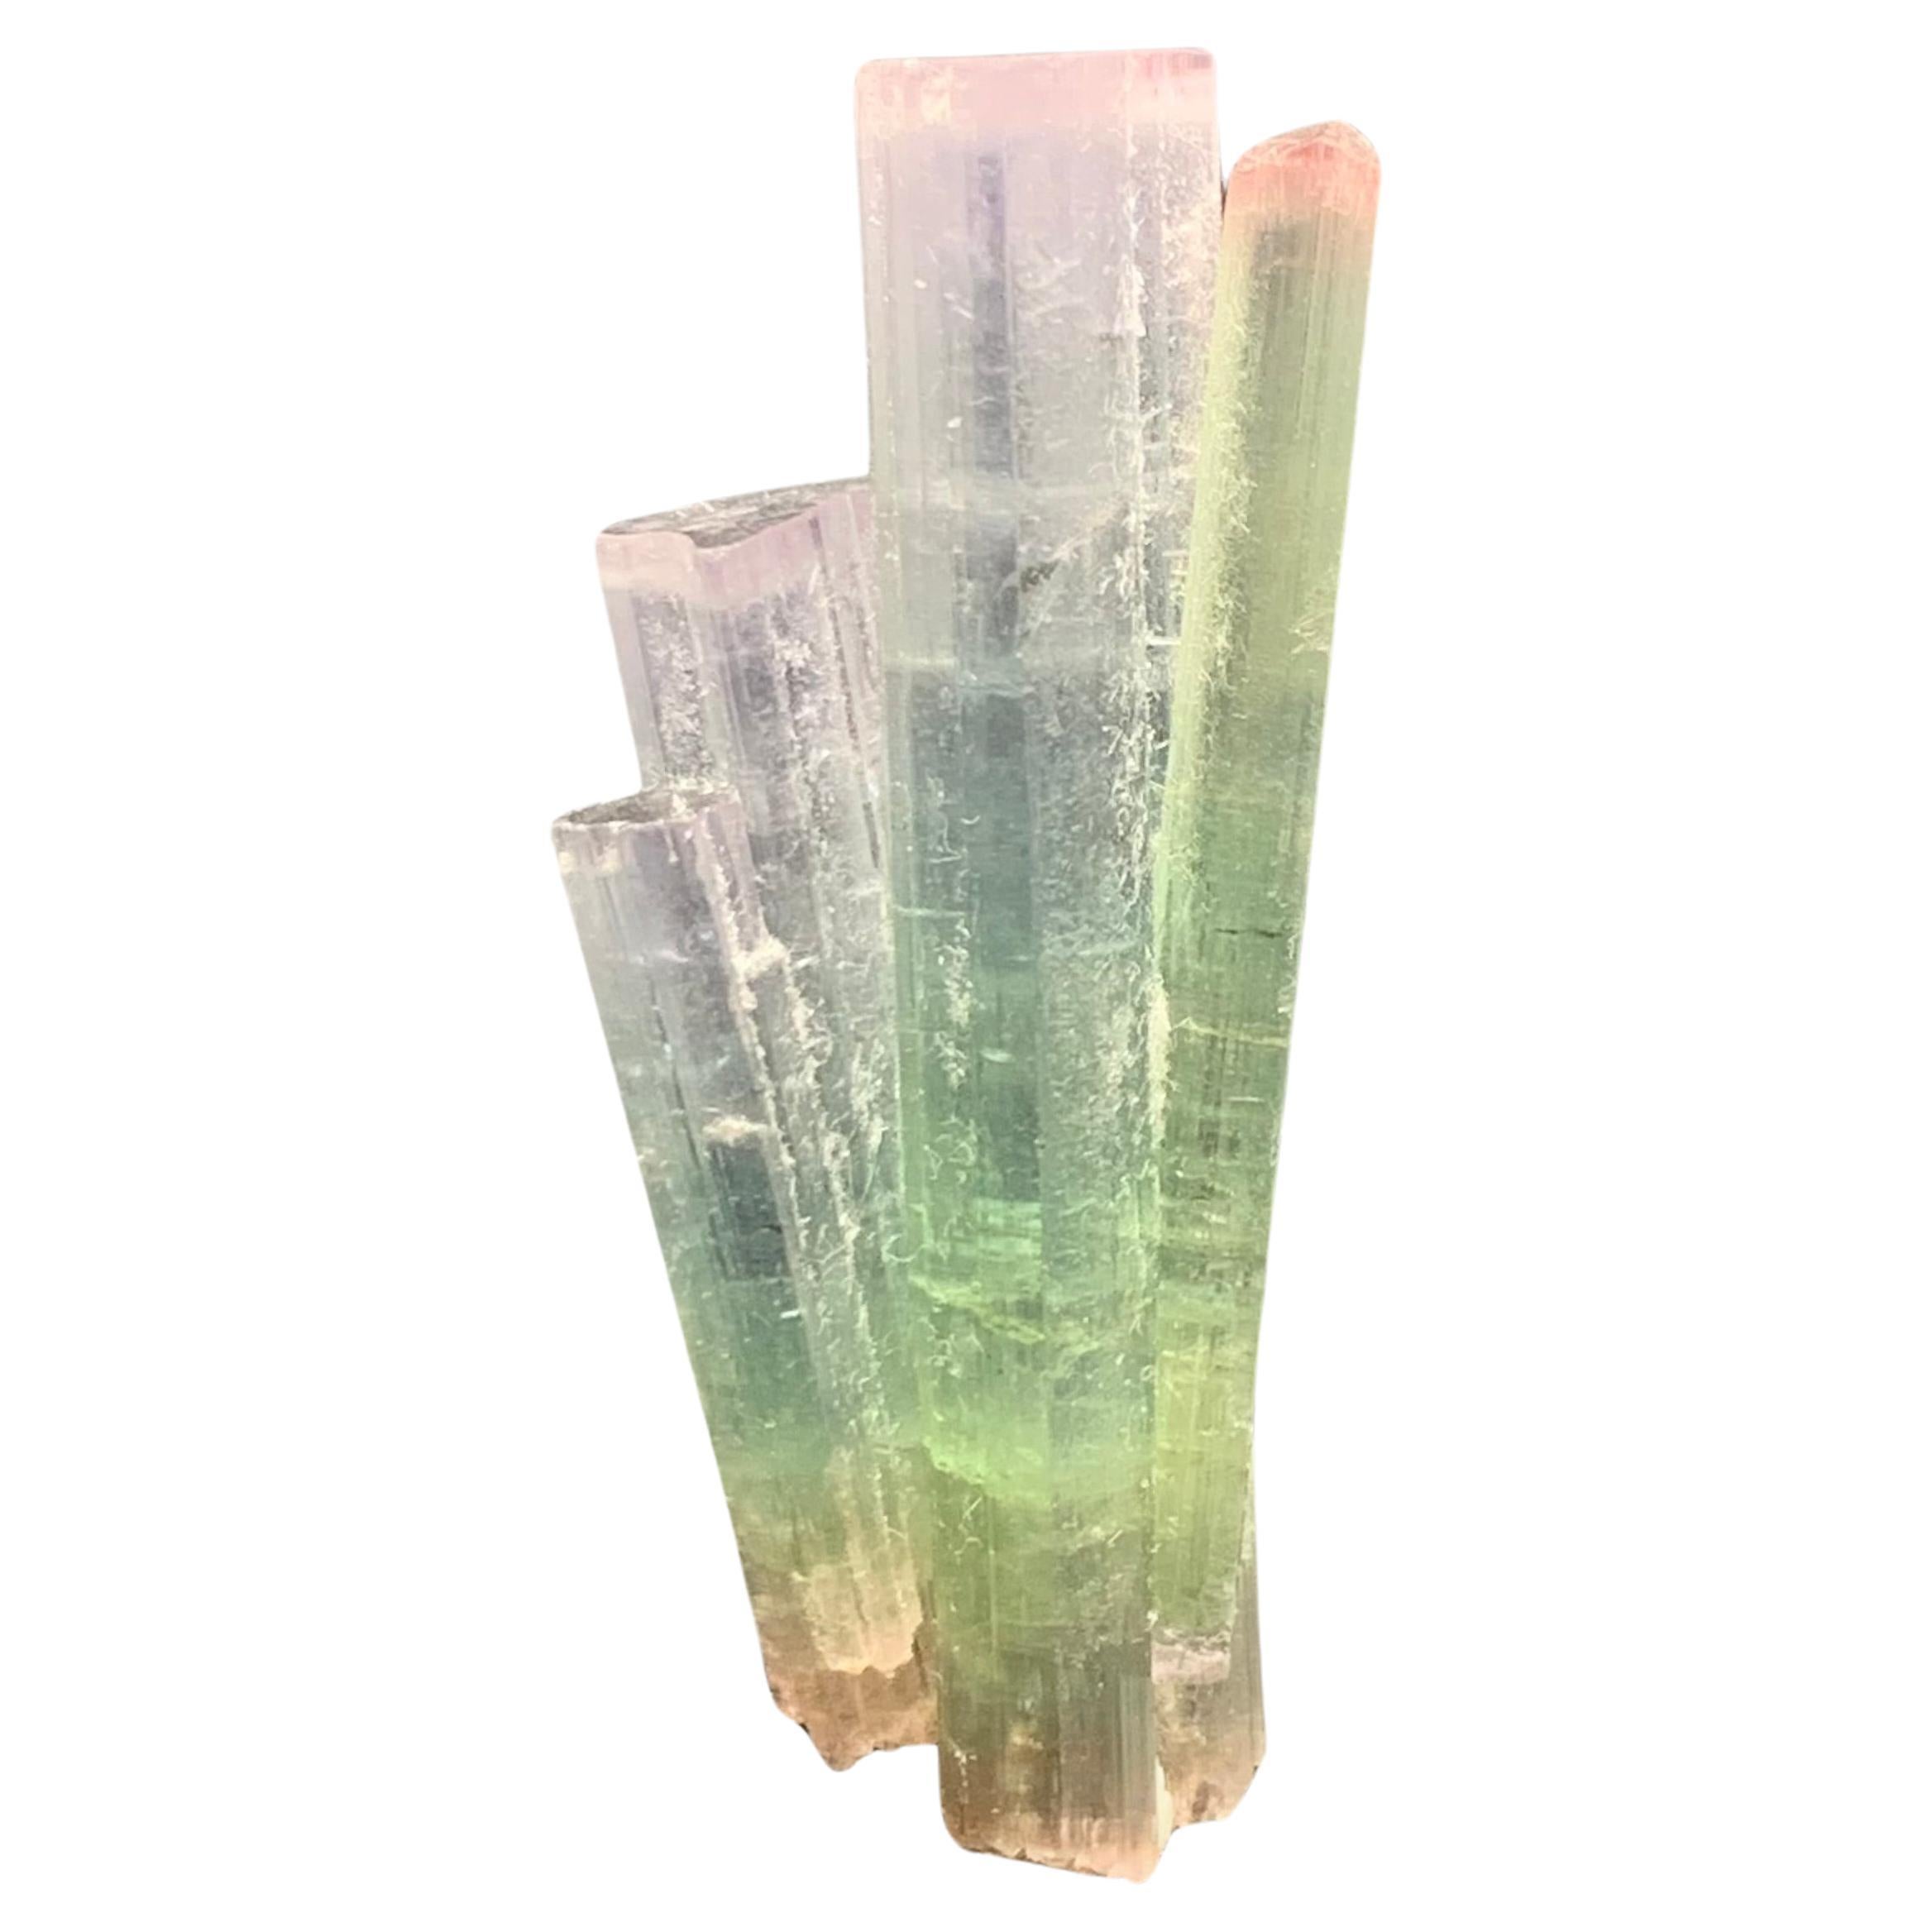 6.82 Gram Pink Cap Tri Color Tourmaline Crystal Bunch From Paprook, Afghanistan 